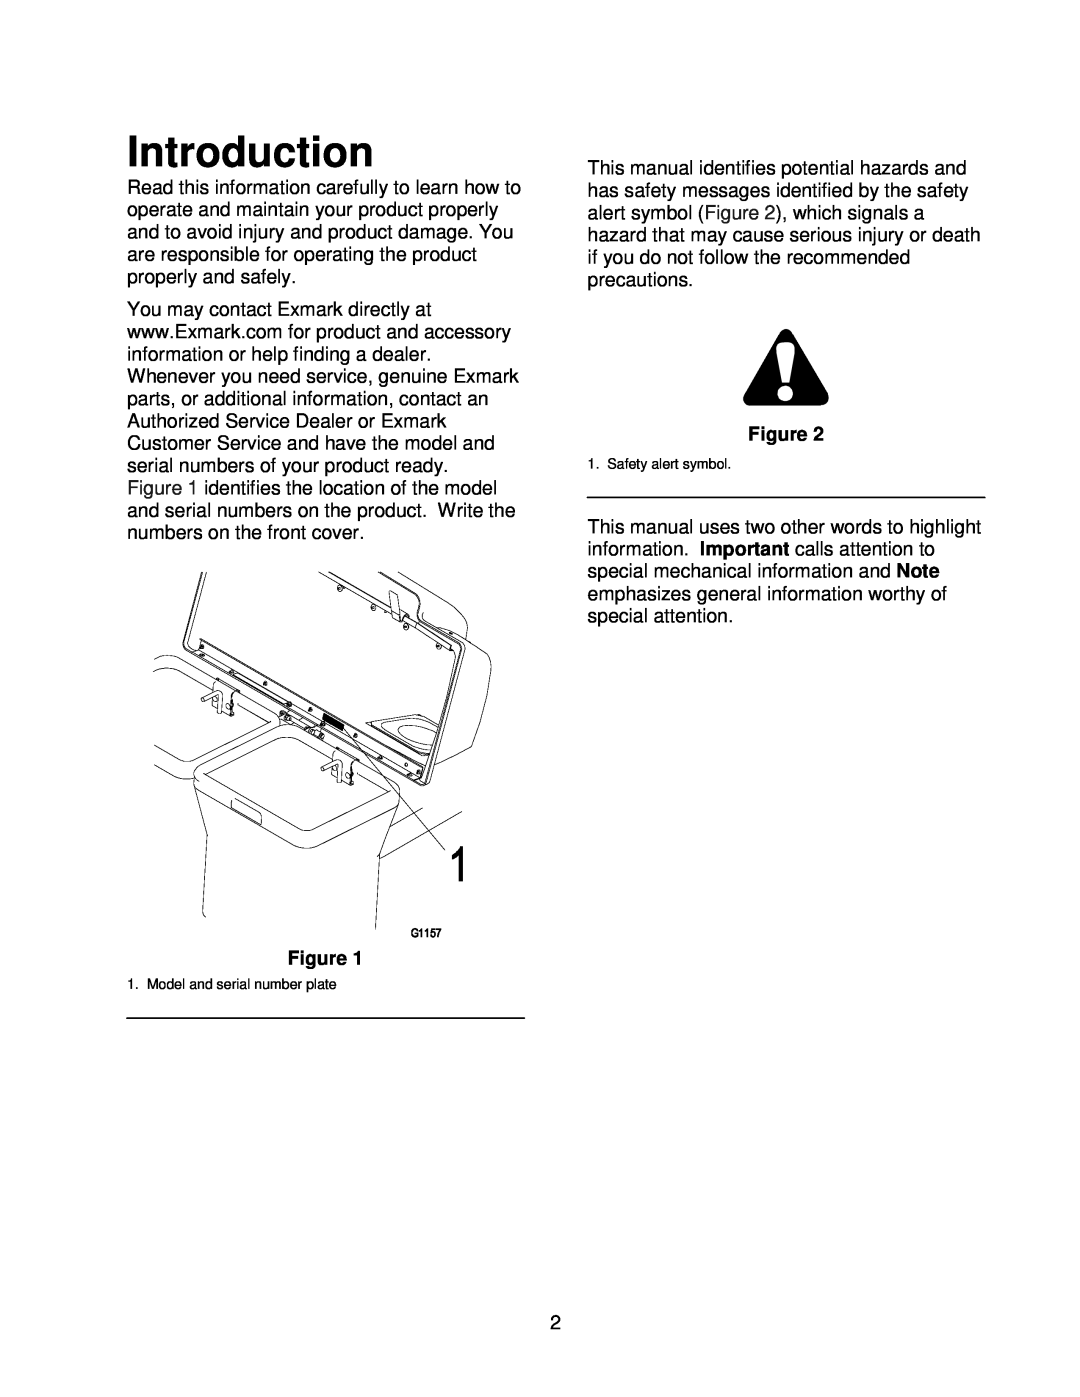 Exmark Quest Bagger manual Introduction, Figure 